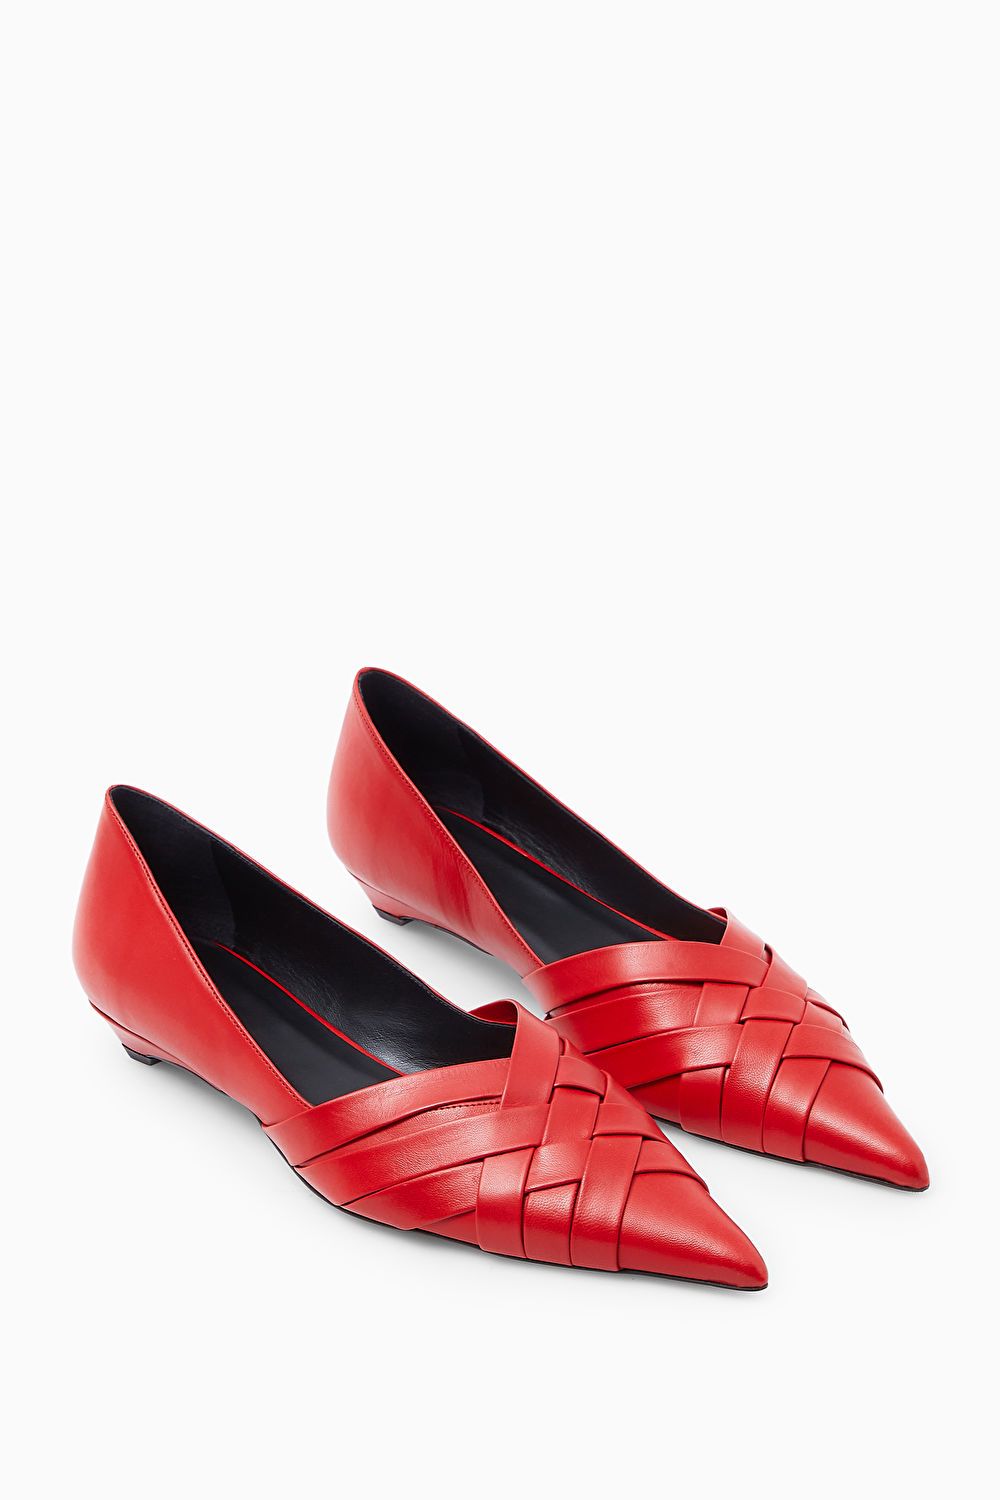 CROSSOVER BALLET FLATS - RED - COS | COS UK